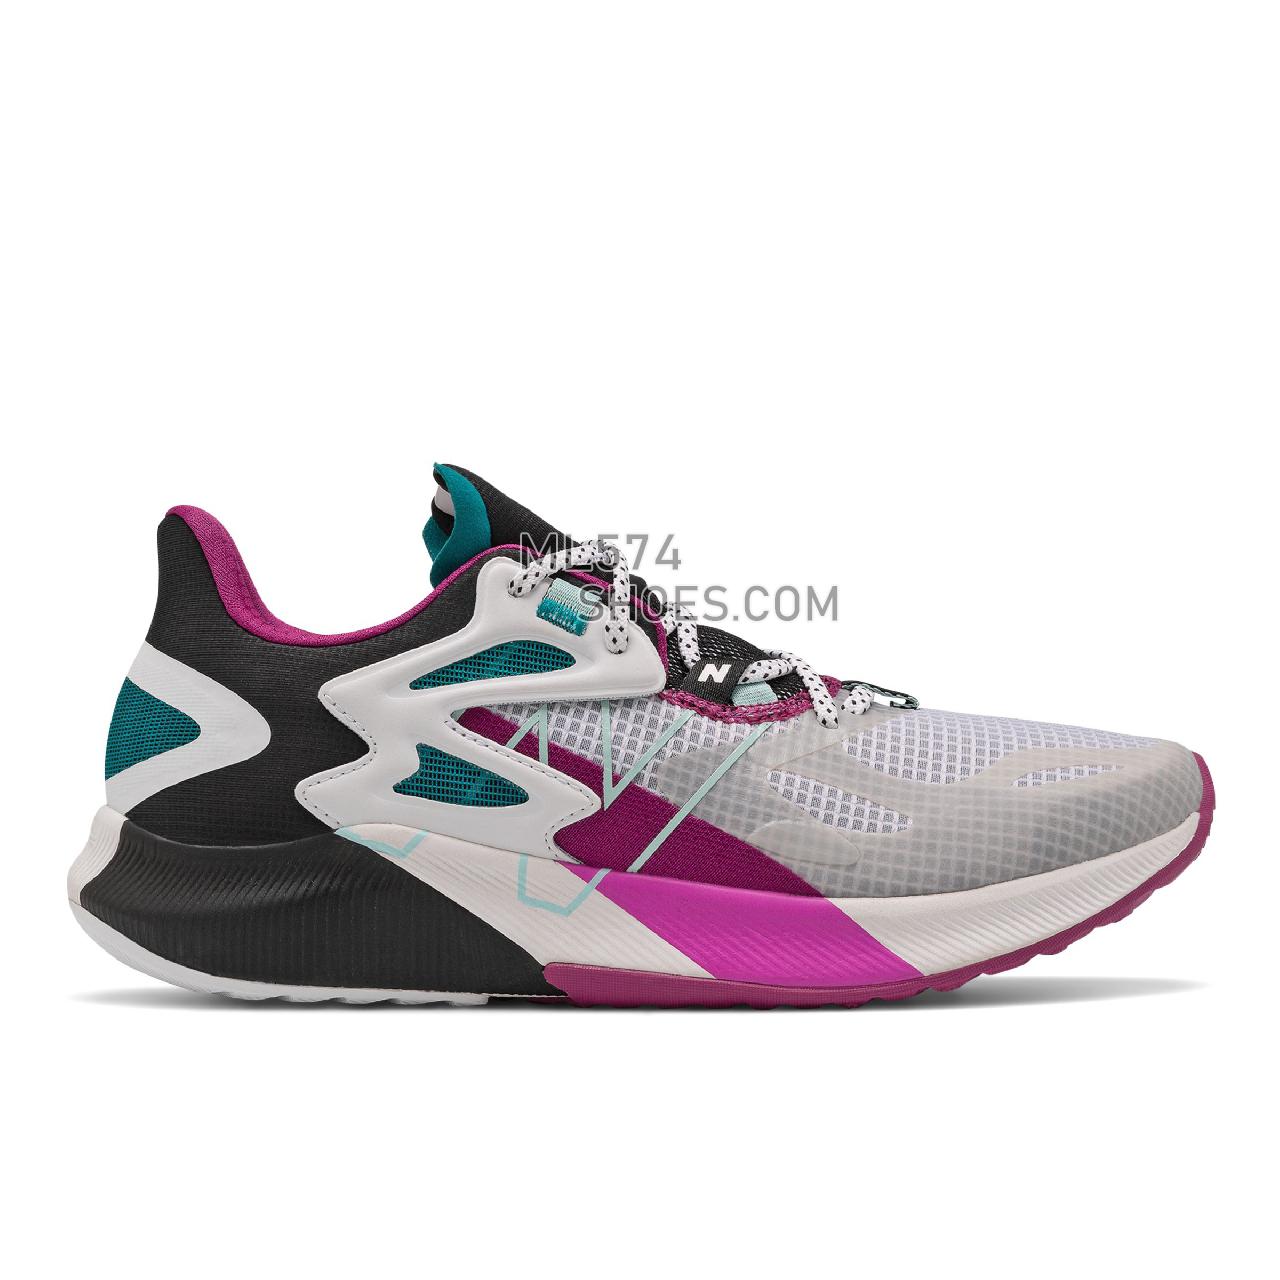 New Balance FuelCell Propel RMX - Men's Neutral Running - White with Team Teal and Jewel - MPRMXLW